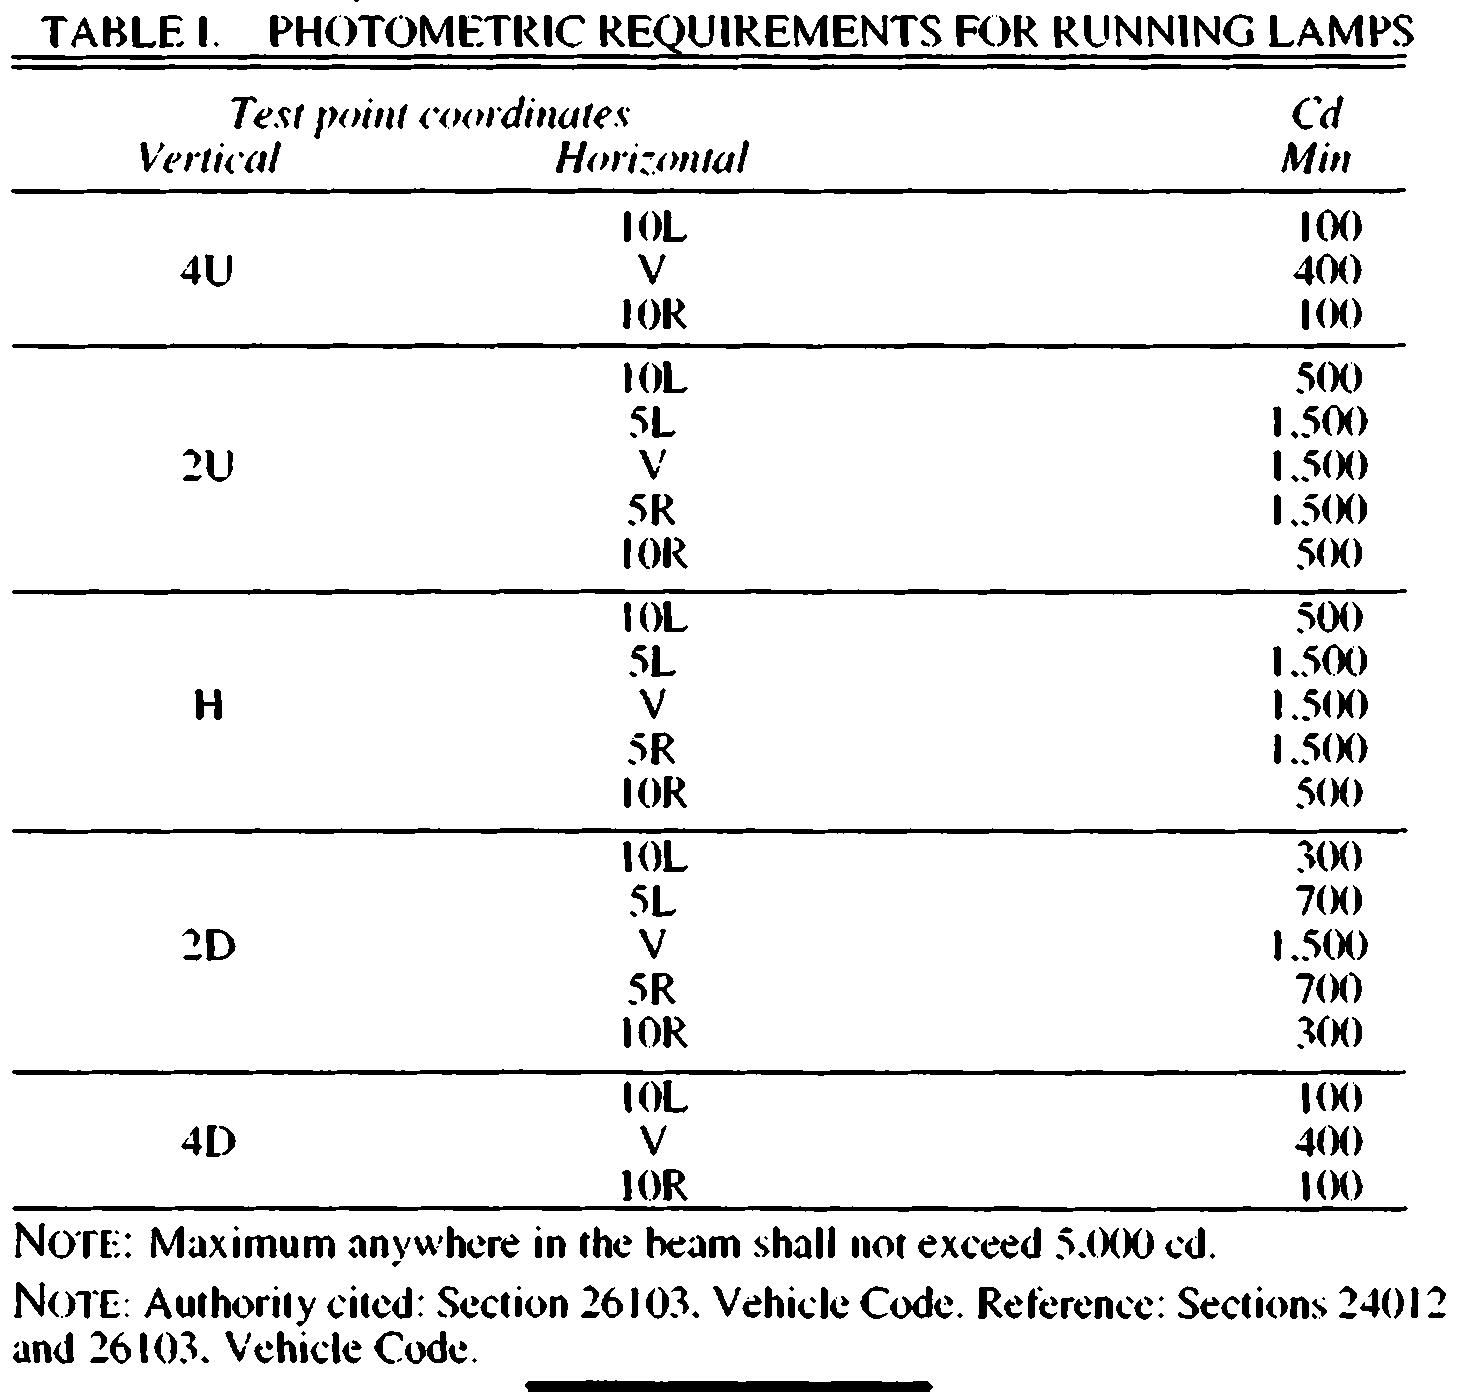 Image 1 within § 783. Photometric Test Requirements.